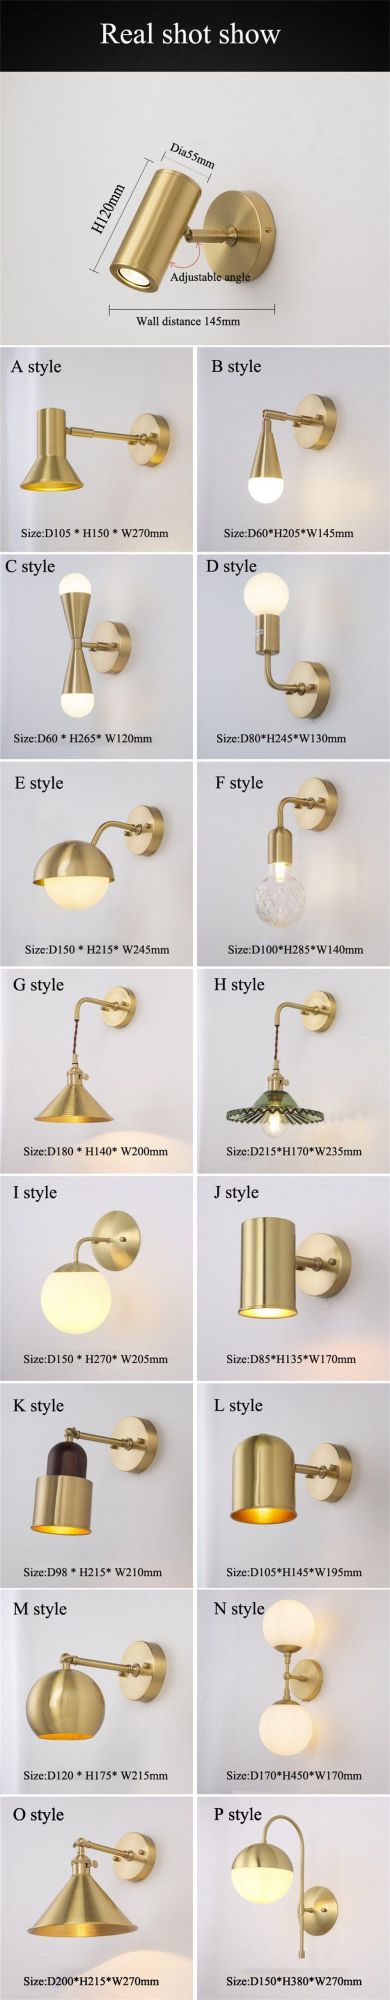 Nordic Brass Bedroom Bedside Wall Lamp Modern Creative Simple Bathroom Mirror Front Lamp Aisle All Copper Retro Lamps